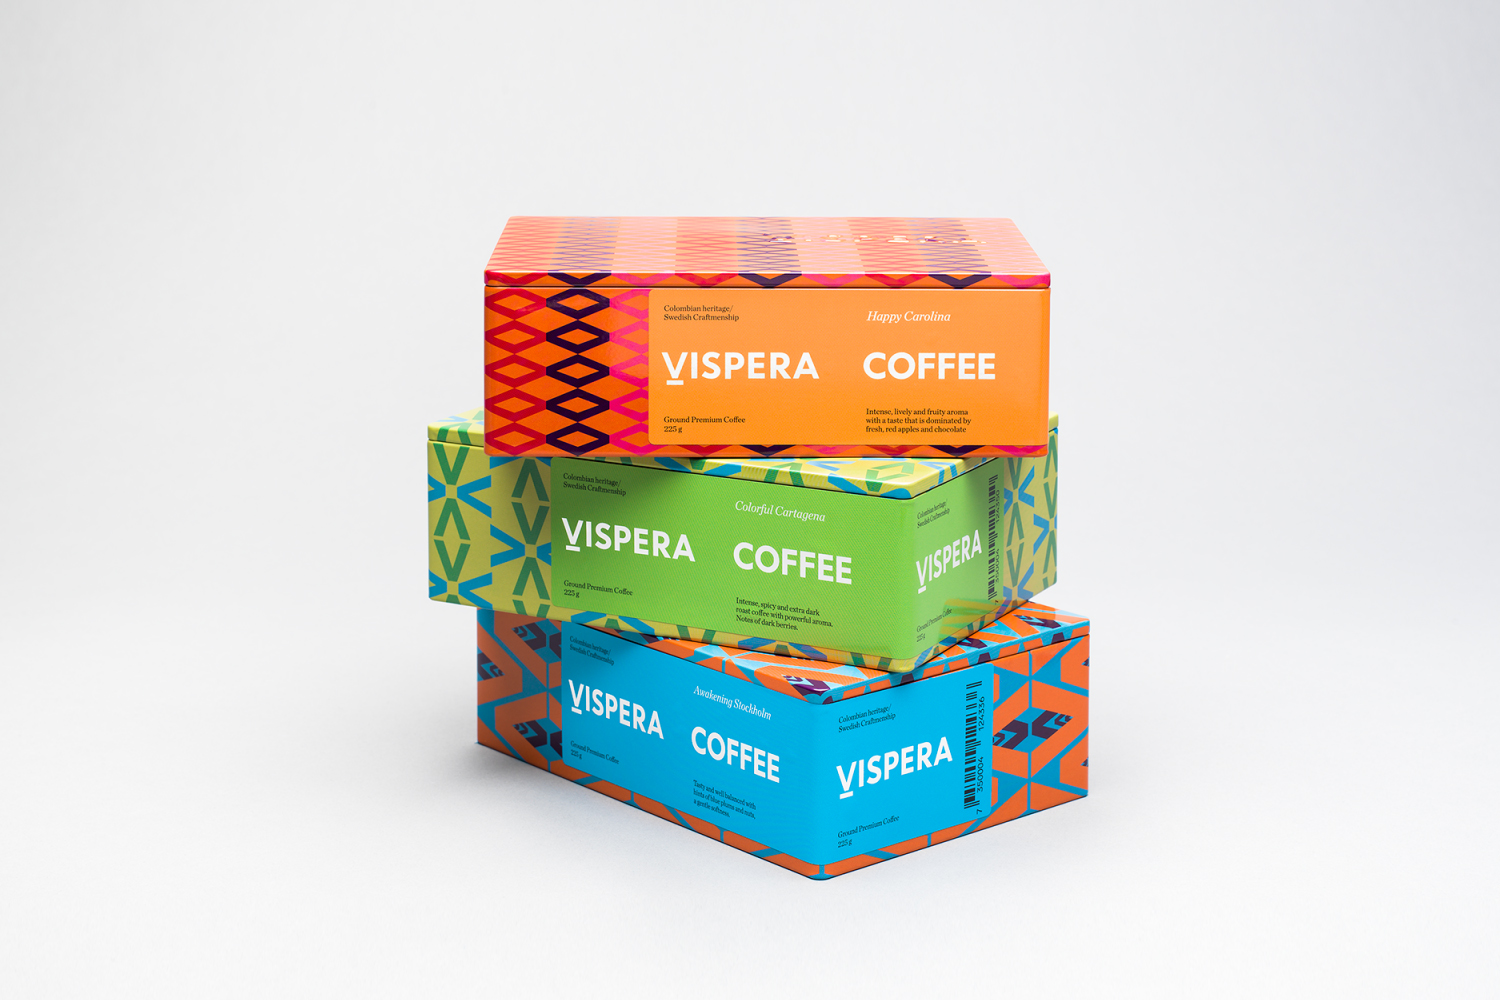 Packaging created by Stockholm Design Lab for Víspera Coffee, a range of 100% Arabica beans sourced from the high altitude plantations of Columbia.